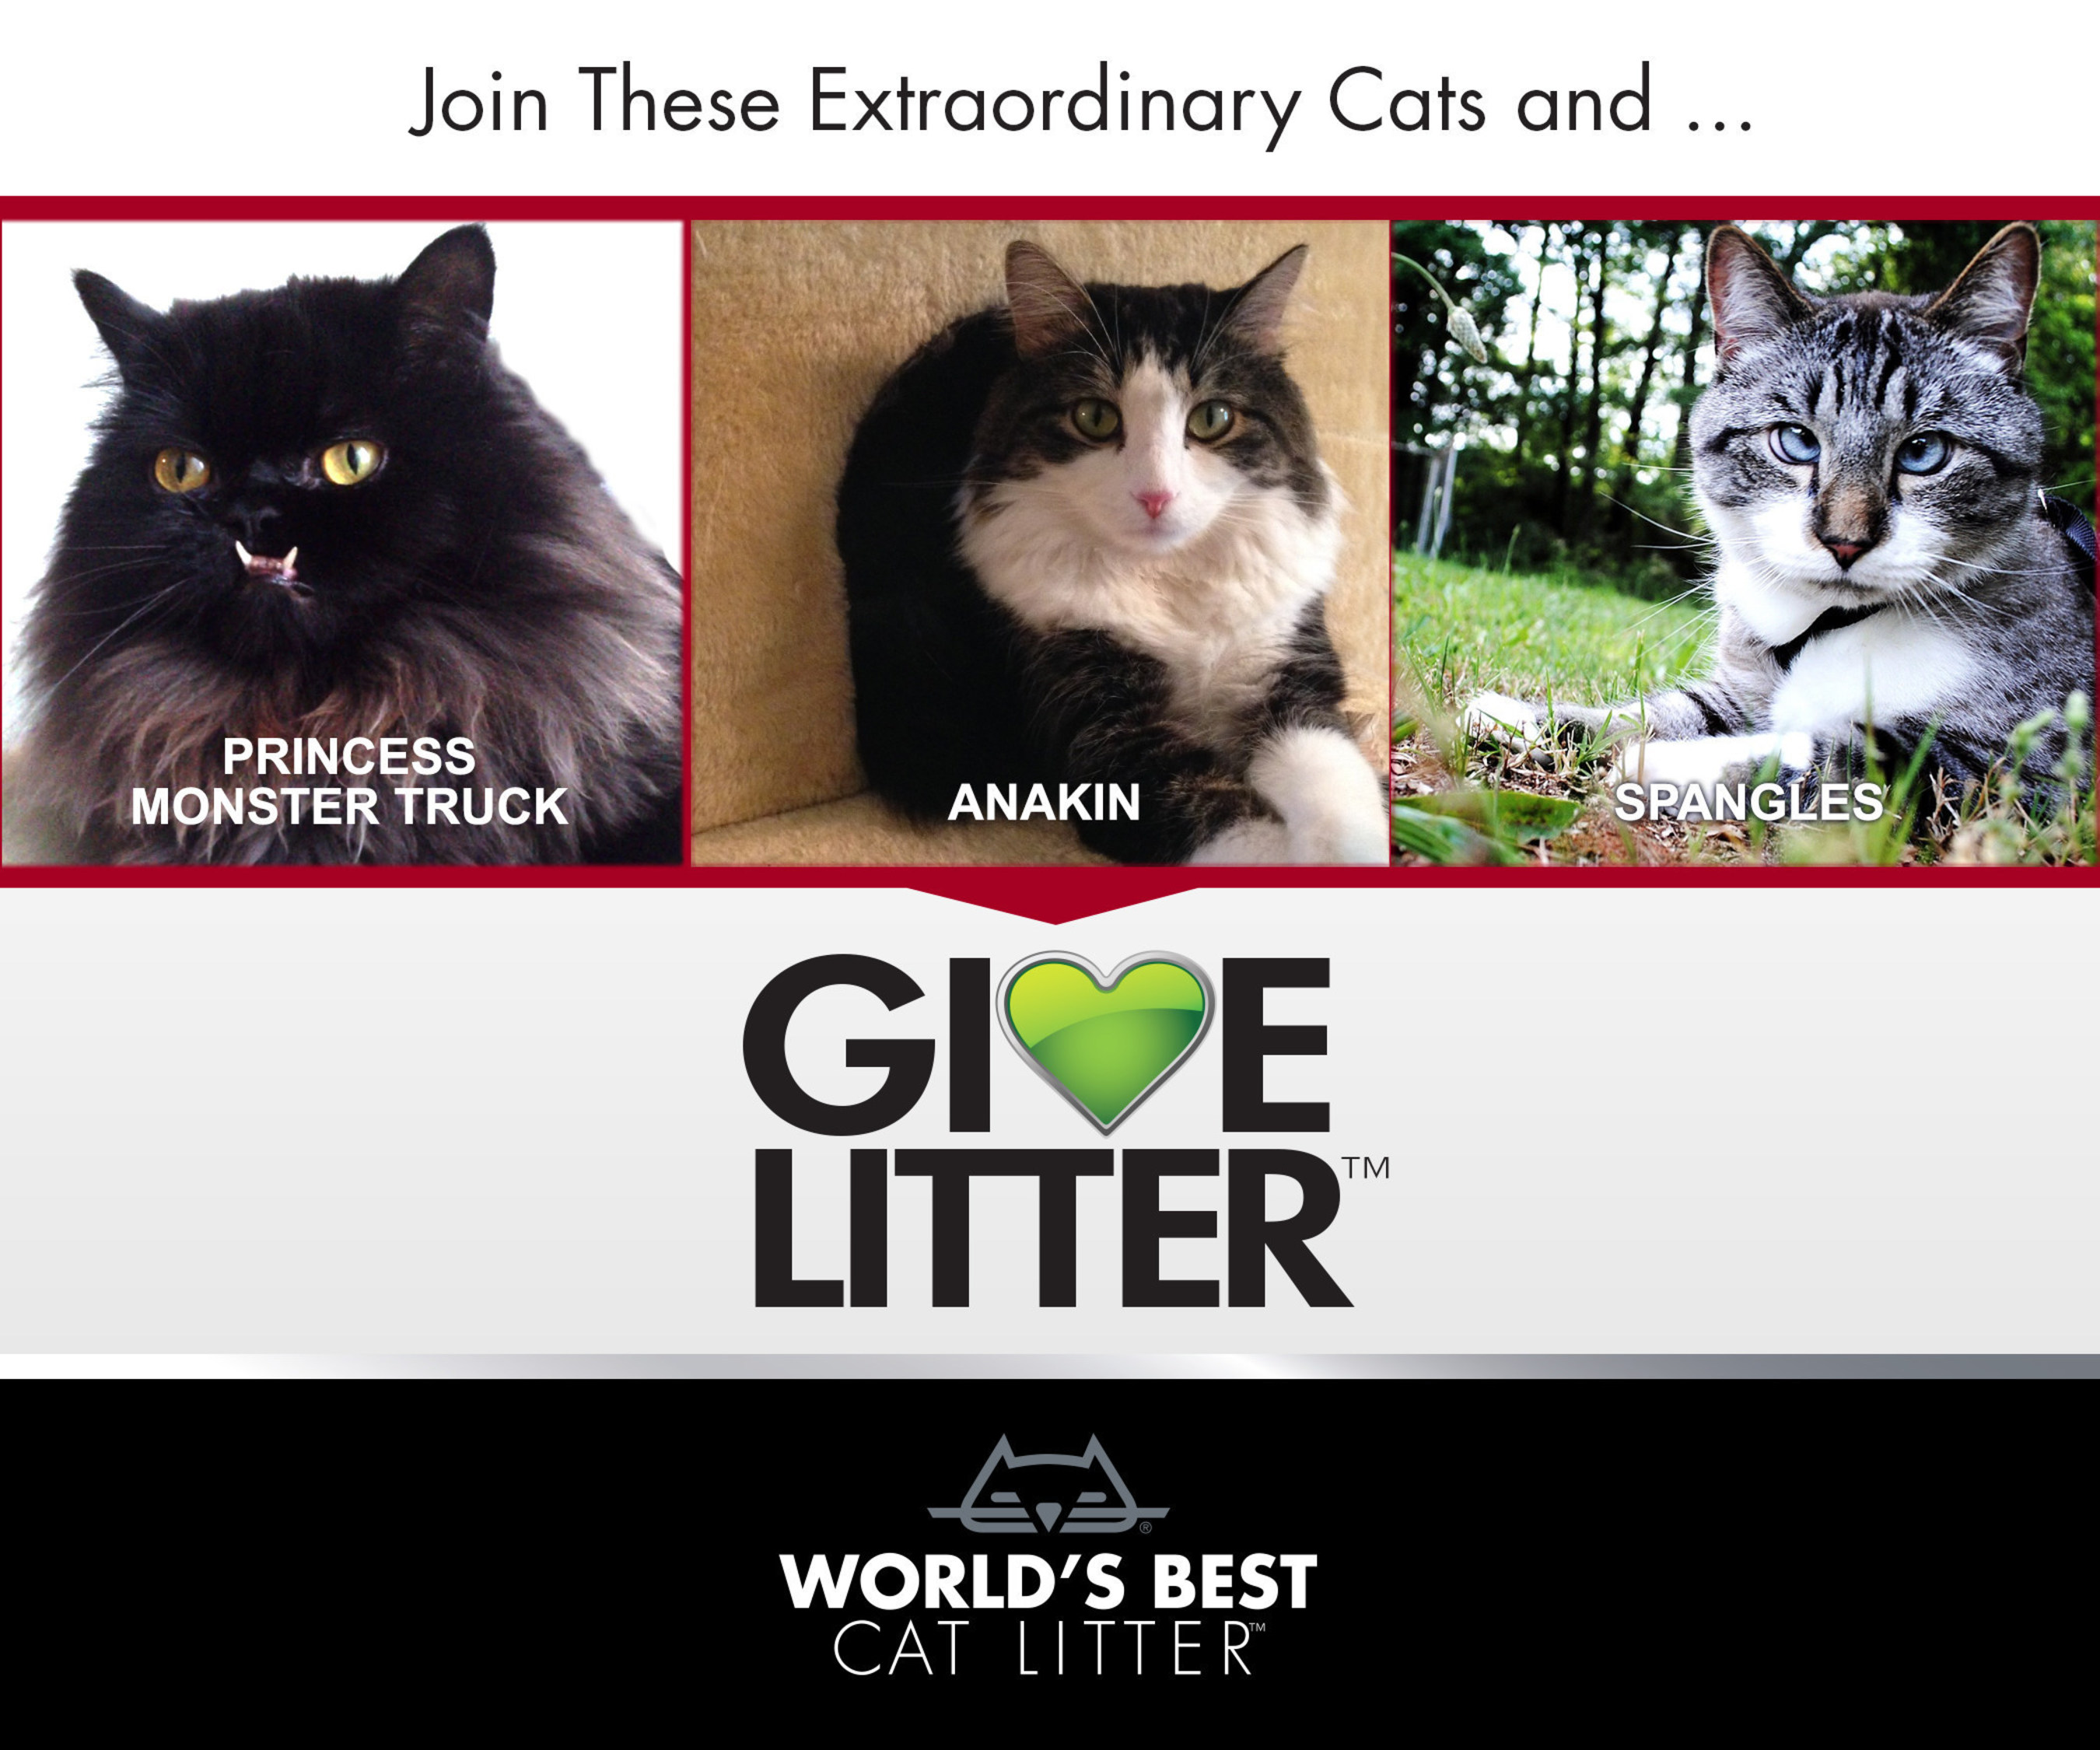 World’s Best Cat Litter(TM) has partnered with three extraordinary cats to help them do extraordinary things for shelter cats during the latest round of the GiveLitter(TM) charity, which allows online cat lovers to donate 30,000 pounds of litter to shelter cats in need. Famous cats Spangles, Princess Monster Truck and Anakin, rescue cats who all overcame their own unique challenges to capture the hearts of thousands online, have now teamed up to help raise litter donations for their favorite shelters. GiveLitter(TM) launches today, and has unlimited voting will run until Friday, July 25. Visit www.worldsbestcatlitter.com/givelitter to cast your vote. (PRNewsFoto/World's Best Cat Litter)